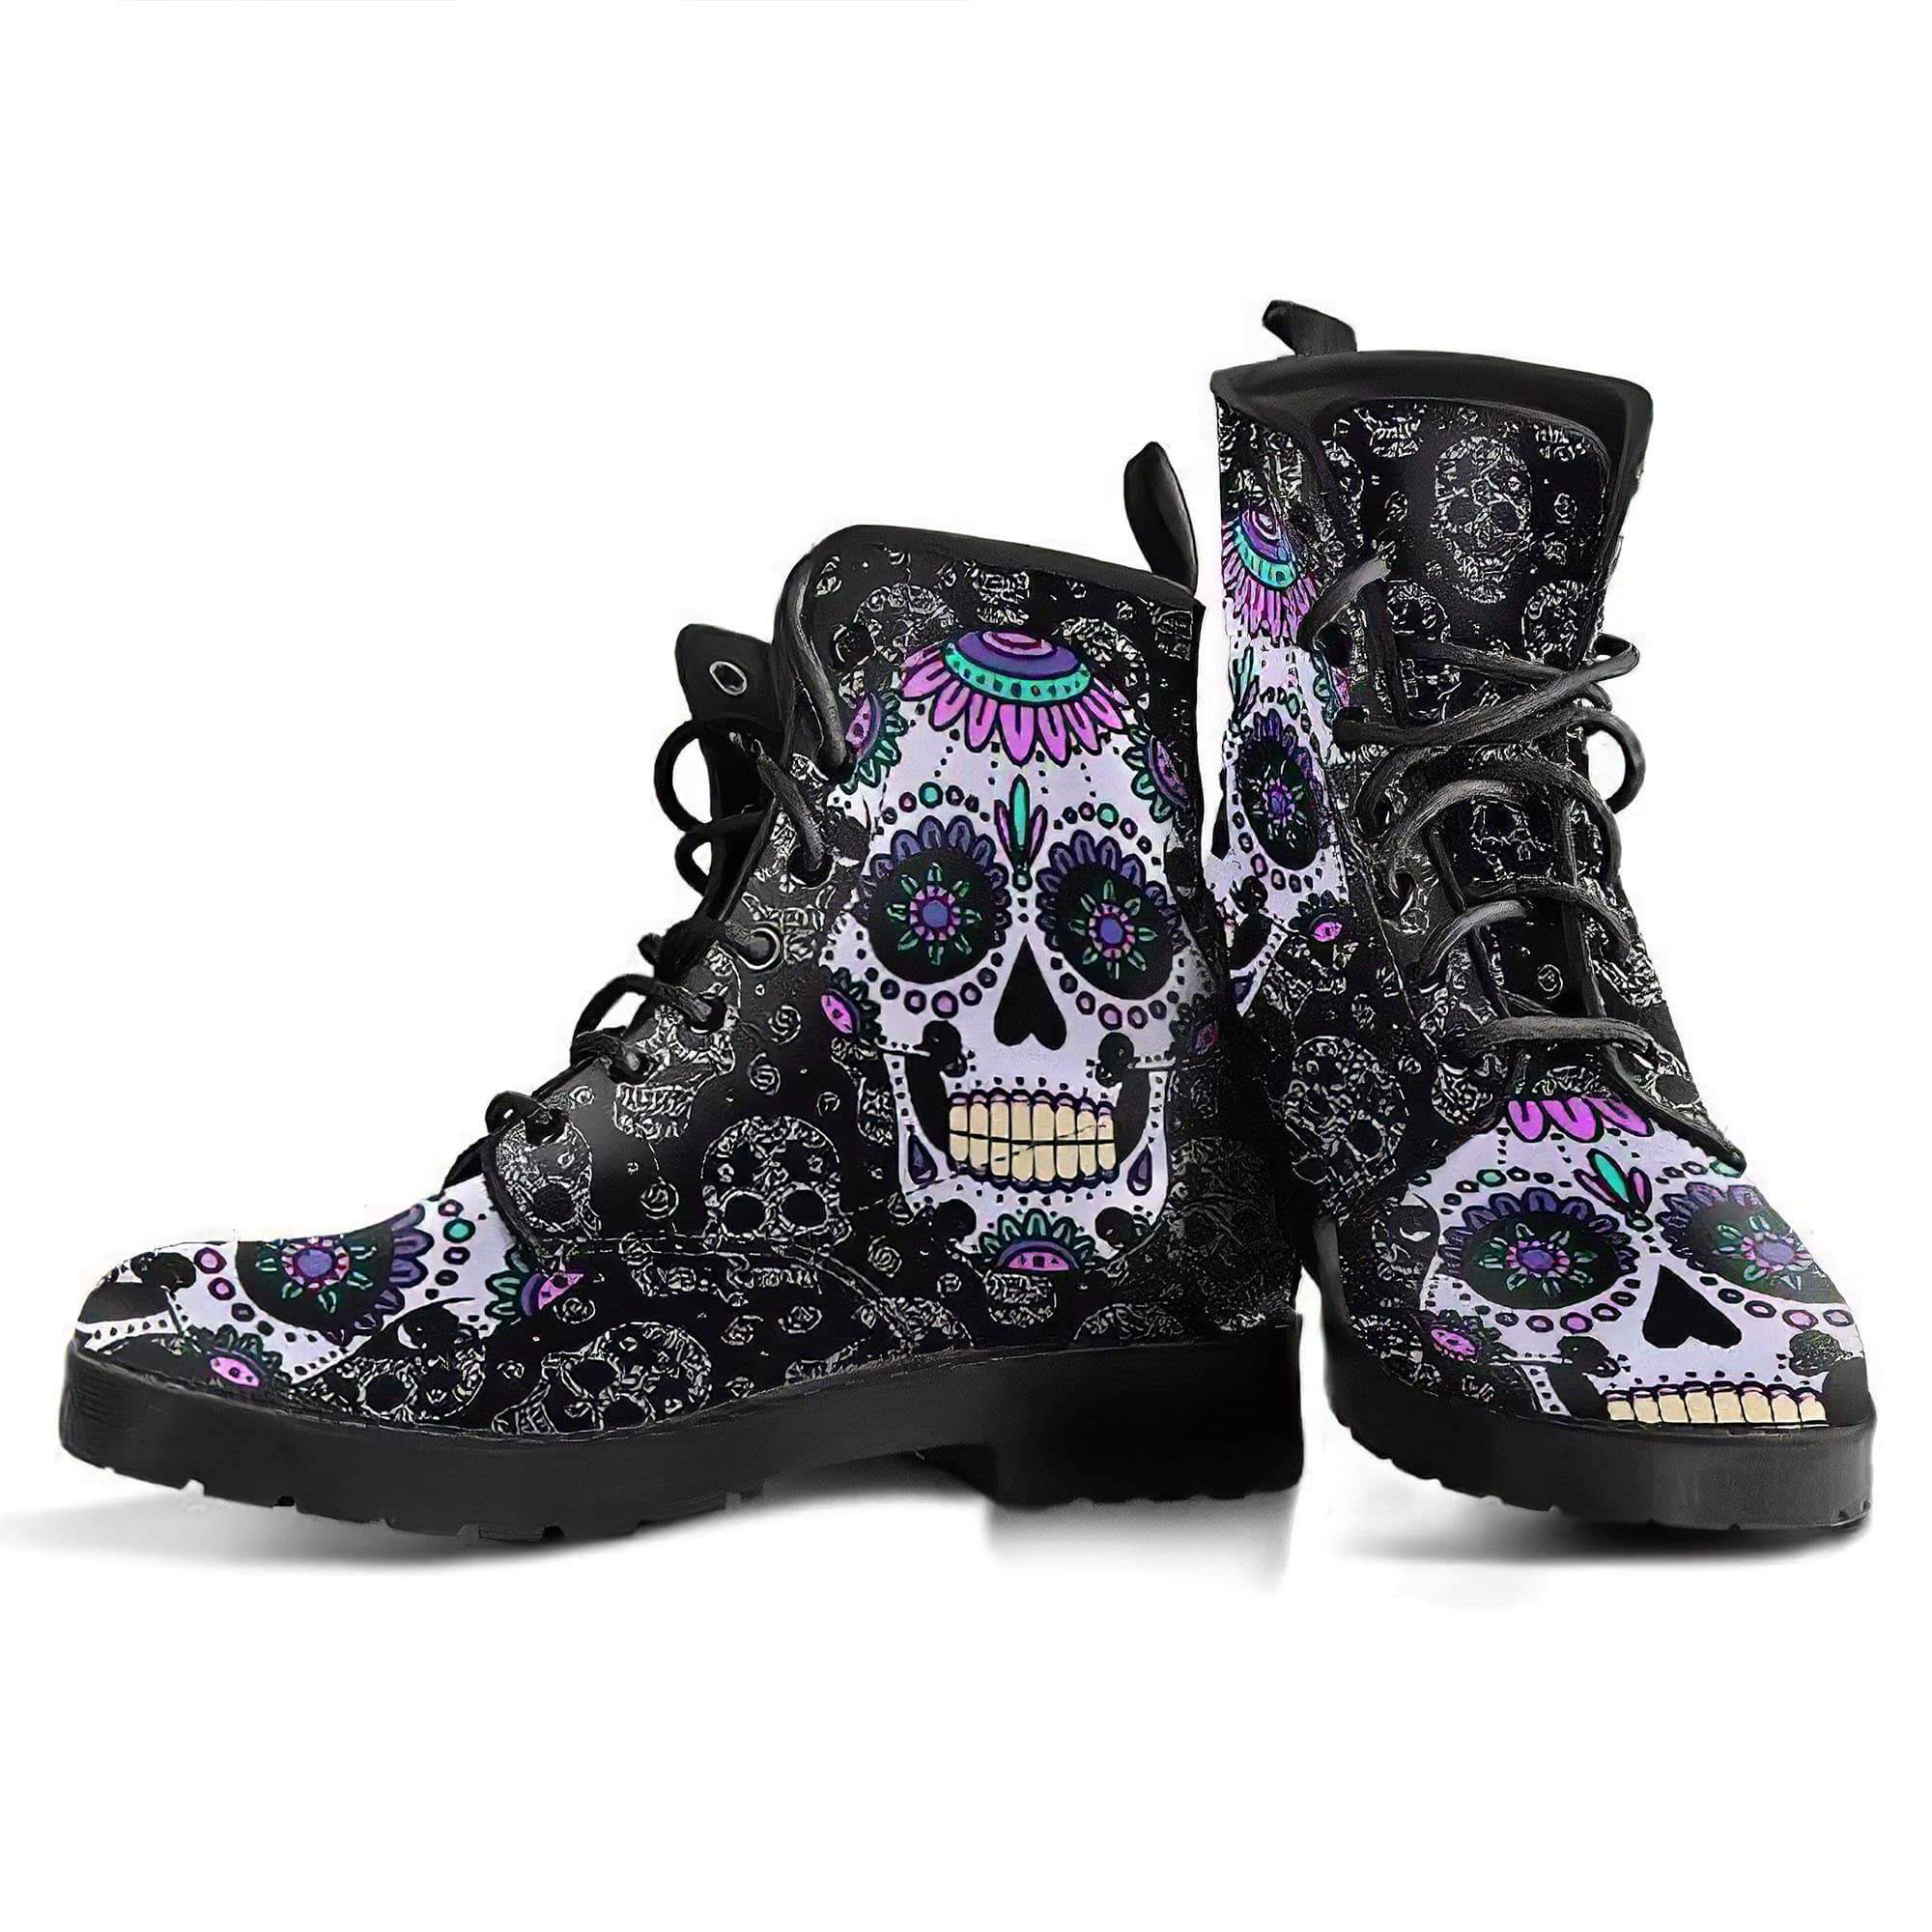 sugar-skull-women-s-leather-boots-women-s-leather-boots-12051956105277.jpg